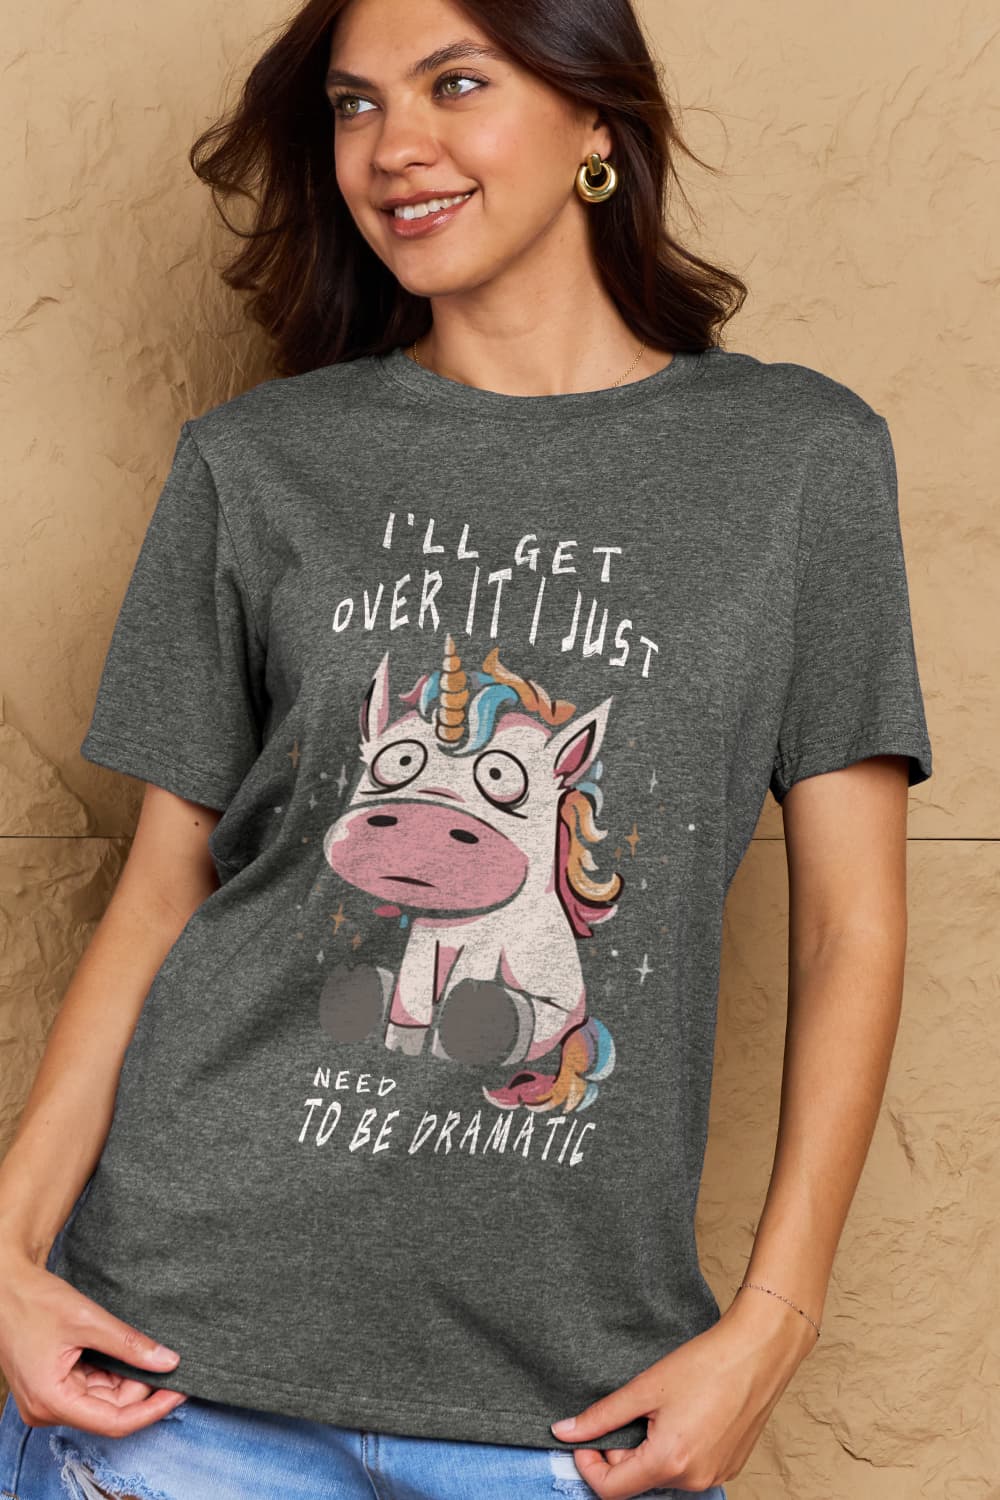 Full Size I’LL GET OVER IT I JUST NEED TO BE DRAMATIC Graphic Cotton Tee - T-Shirts - Shirts & Tops - 8 - 2024